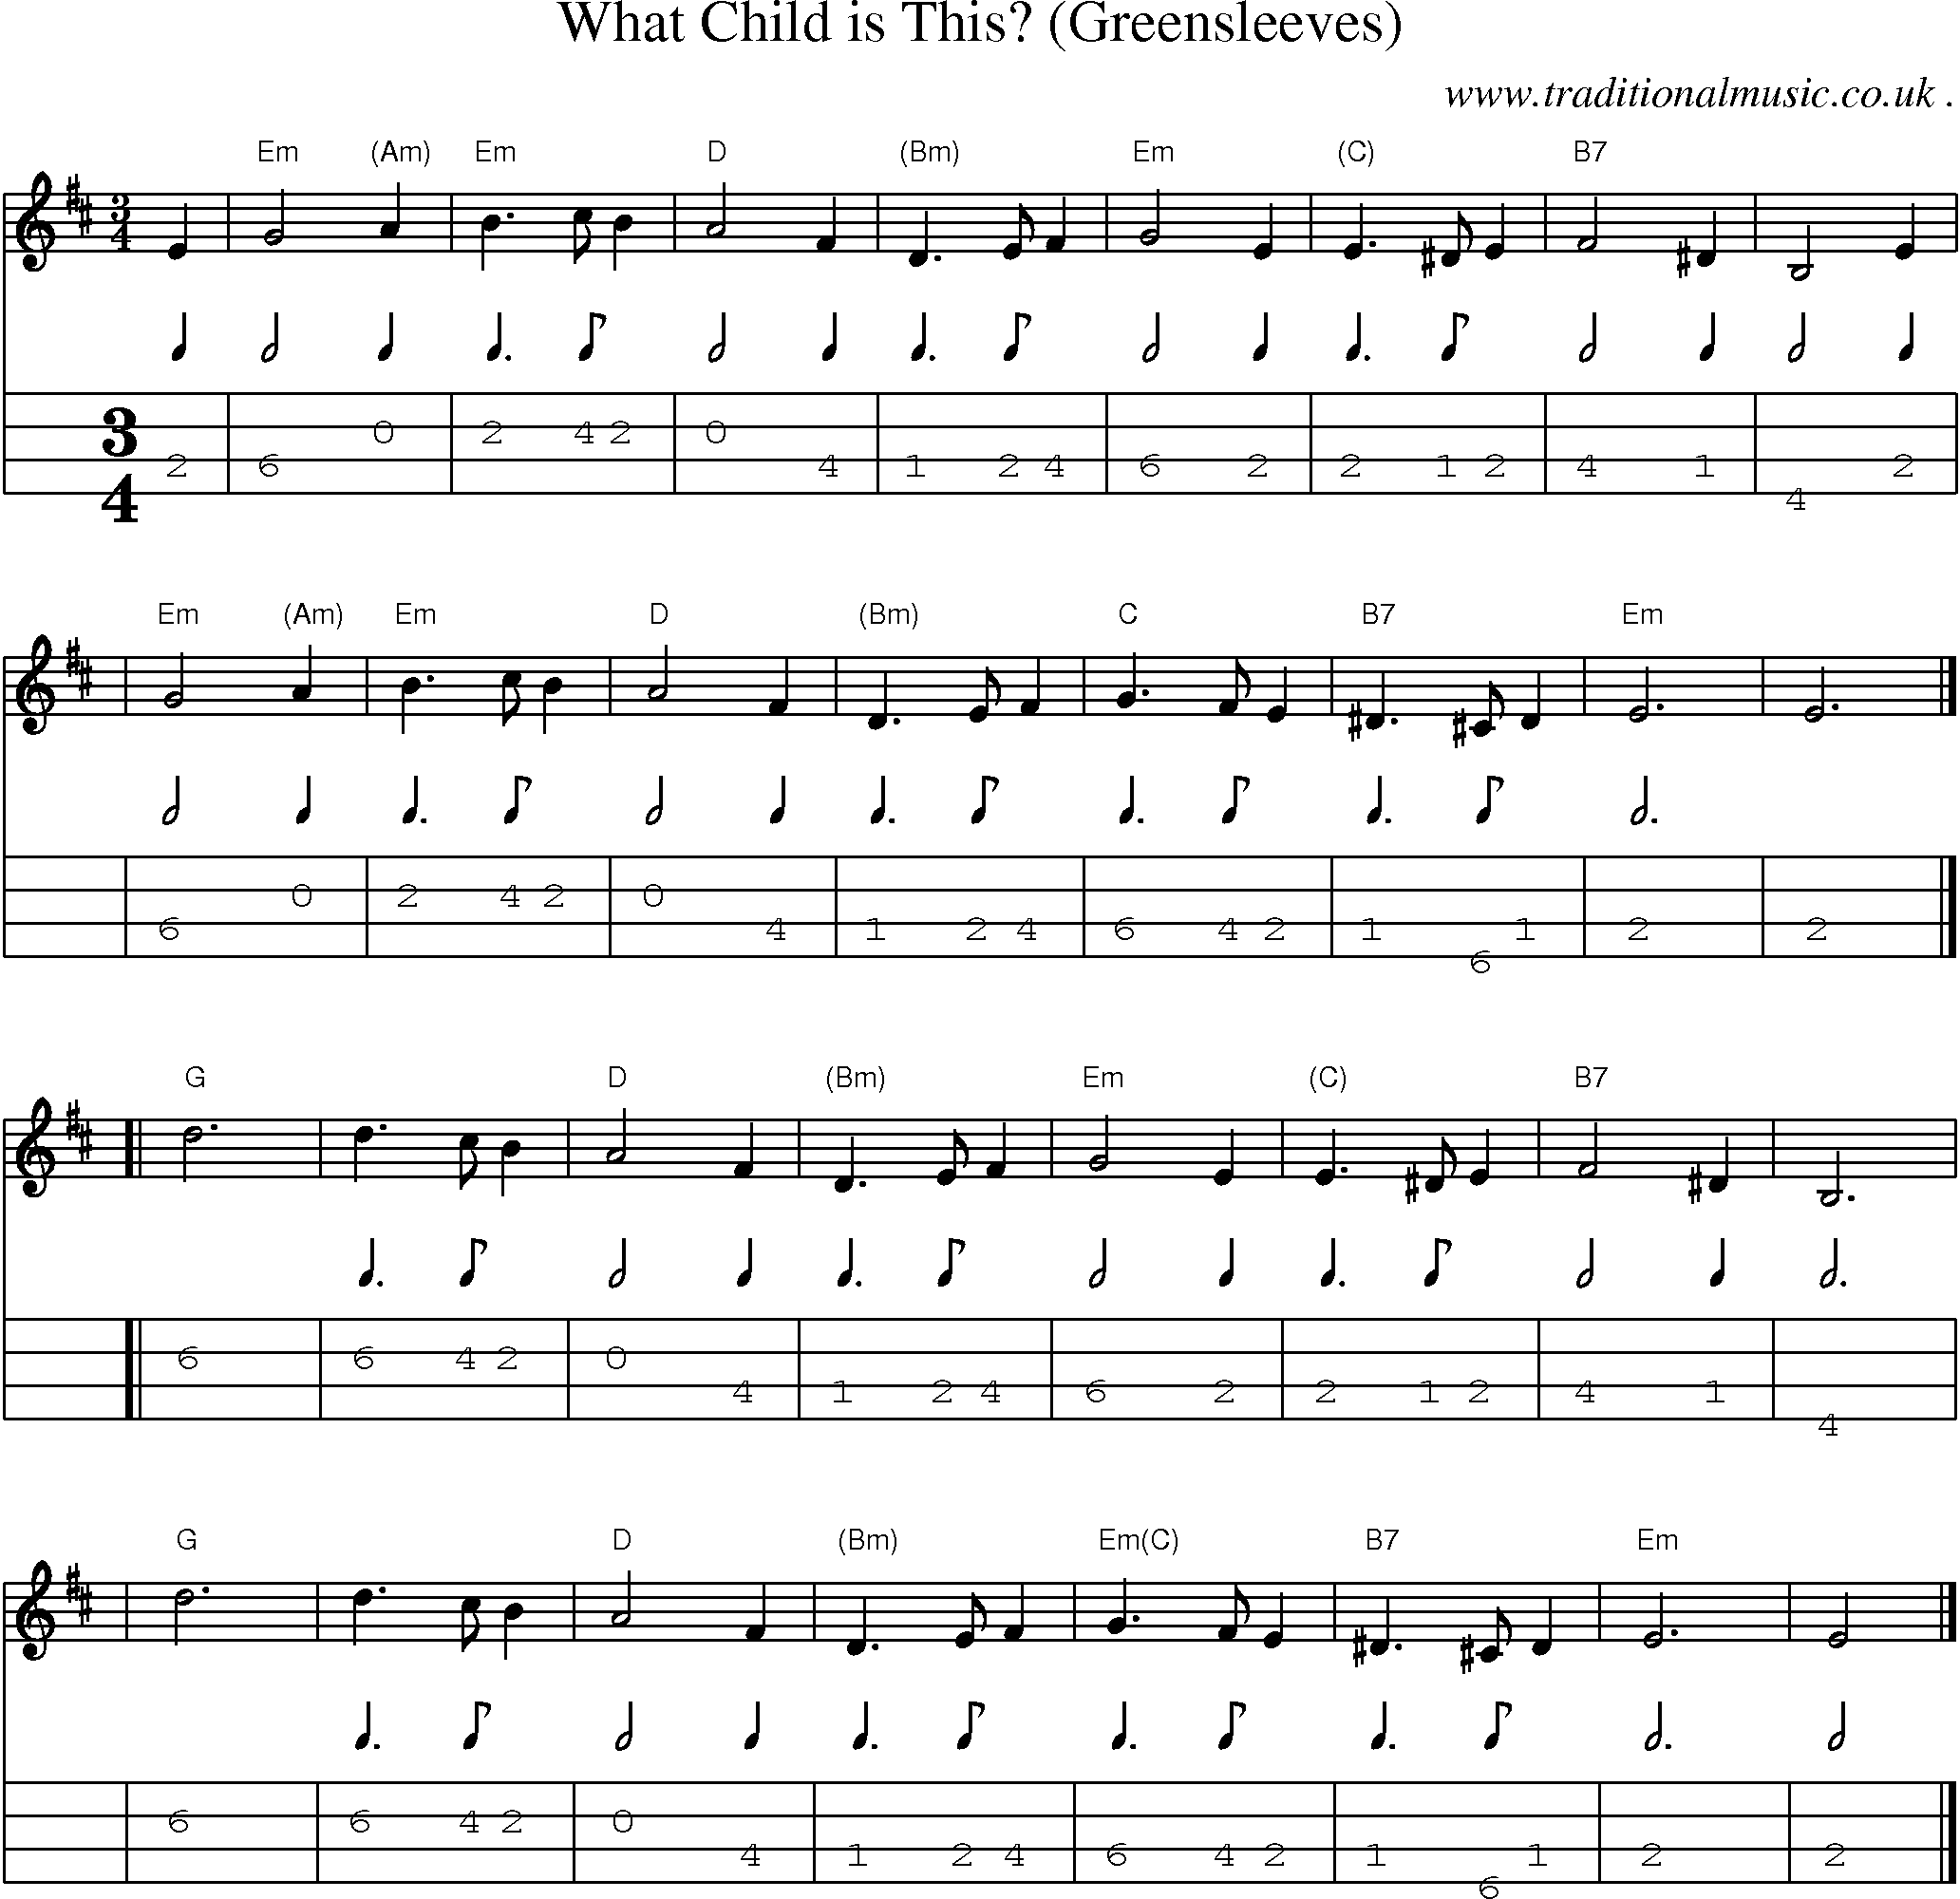 Sheet-music  score, Chords and Mandolin Tabs for What Child Is This Greensleeves